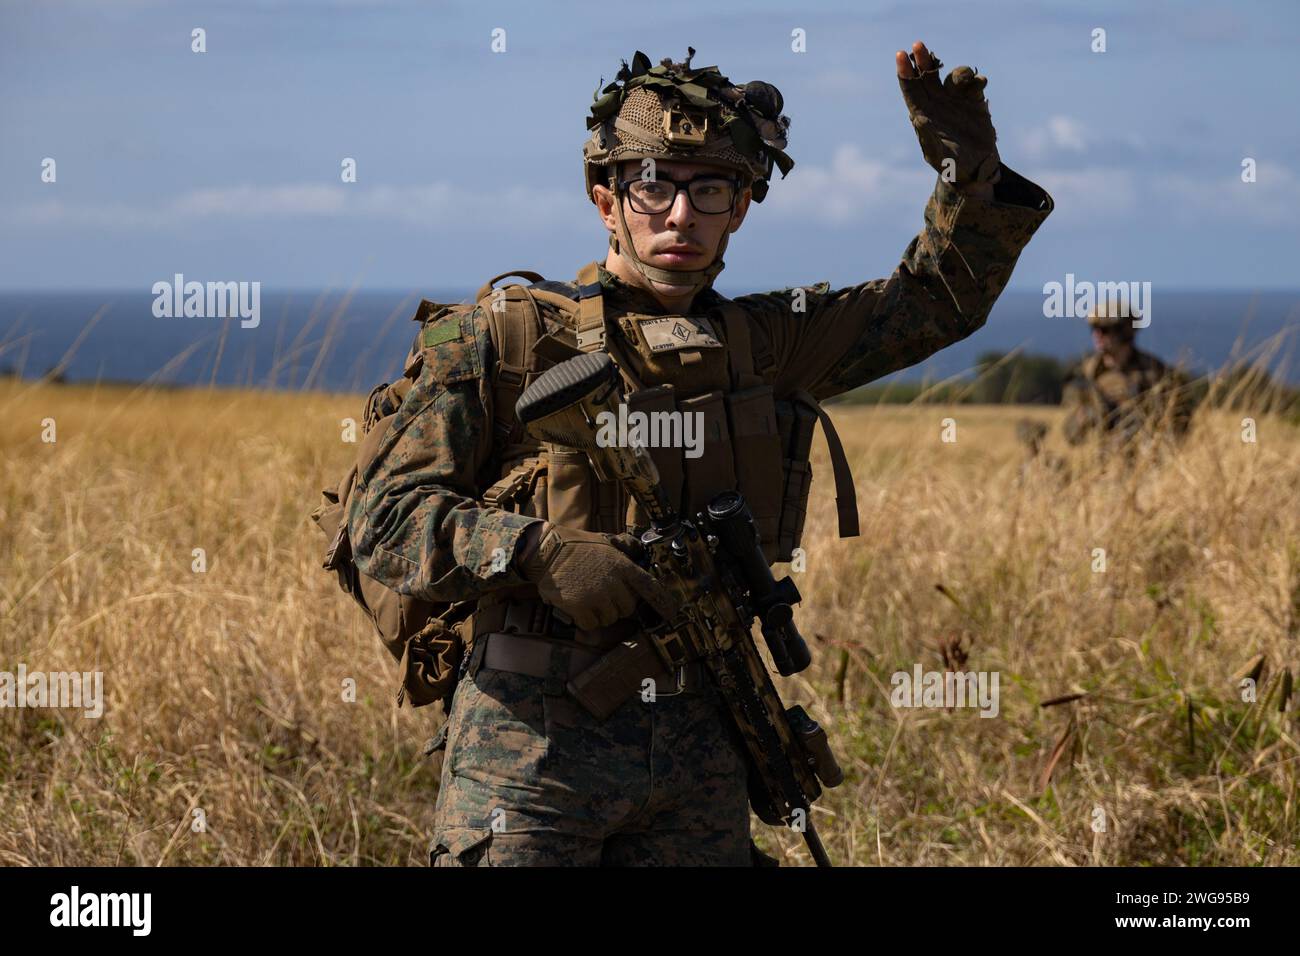 U.S. Marine Corps Lance Cpl. Aaron Coats, an infantry Marine with Battalion Landing Team 1/1, 31st Marine Expeditionary Unit, executes a hand signal while on a patrol during a helicopter raid exercise at Ie Shima, Okinawa, Japan, Feb. 2, 2024. The exercise simulated taking control of an enemy airfield and supporting further denial operations. The 31st MEU is operating aboard ships of USS America Amphibious Ready Group in the 7th fleet area of operations to enhance interoperability with allies and partners and serve as a ready response force to defend peace and stability in the Indo-Pacific reg Stock Photo